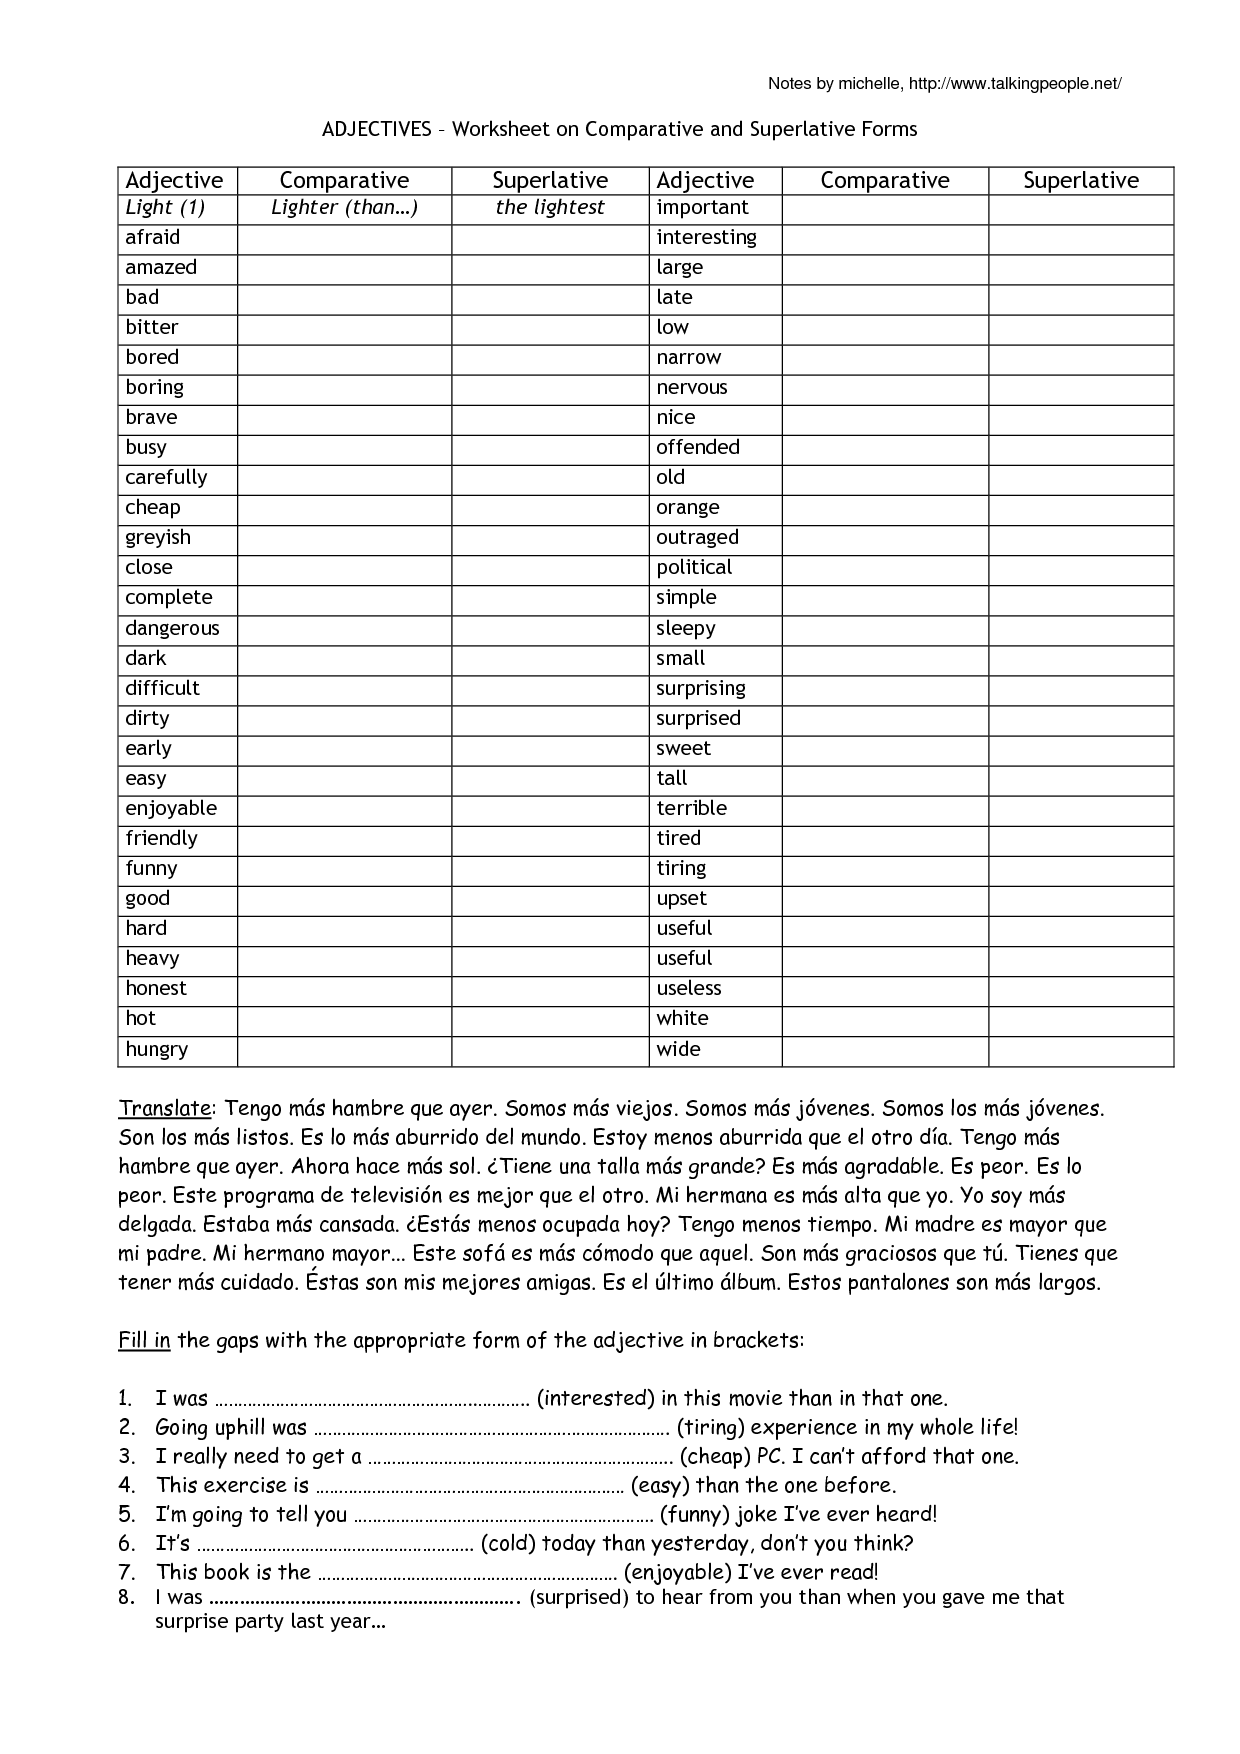 comparative-and-superlative-worksheet-free-printable-pdf-for-children-answers-and-completion-rate